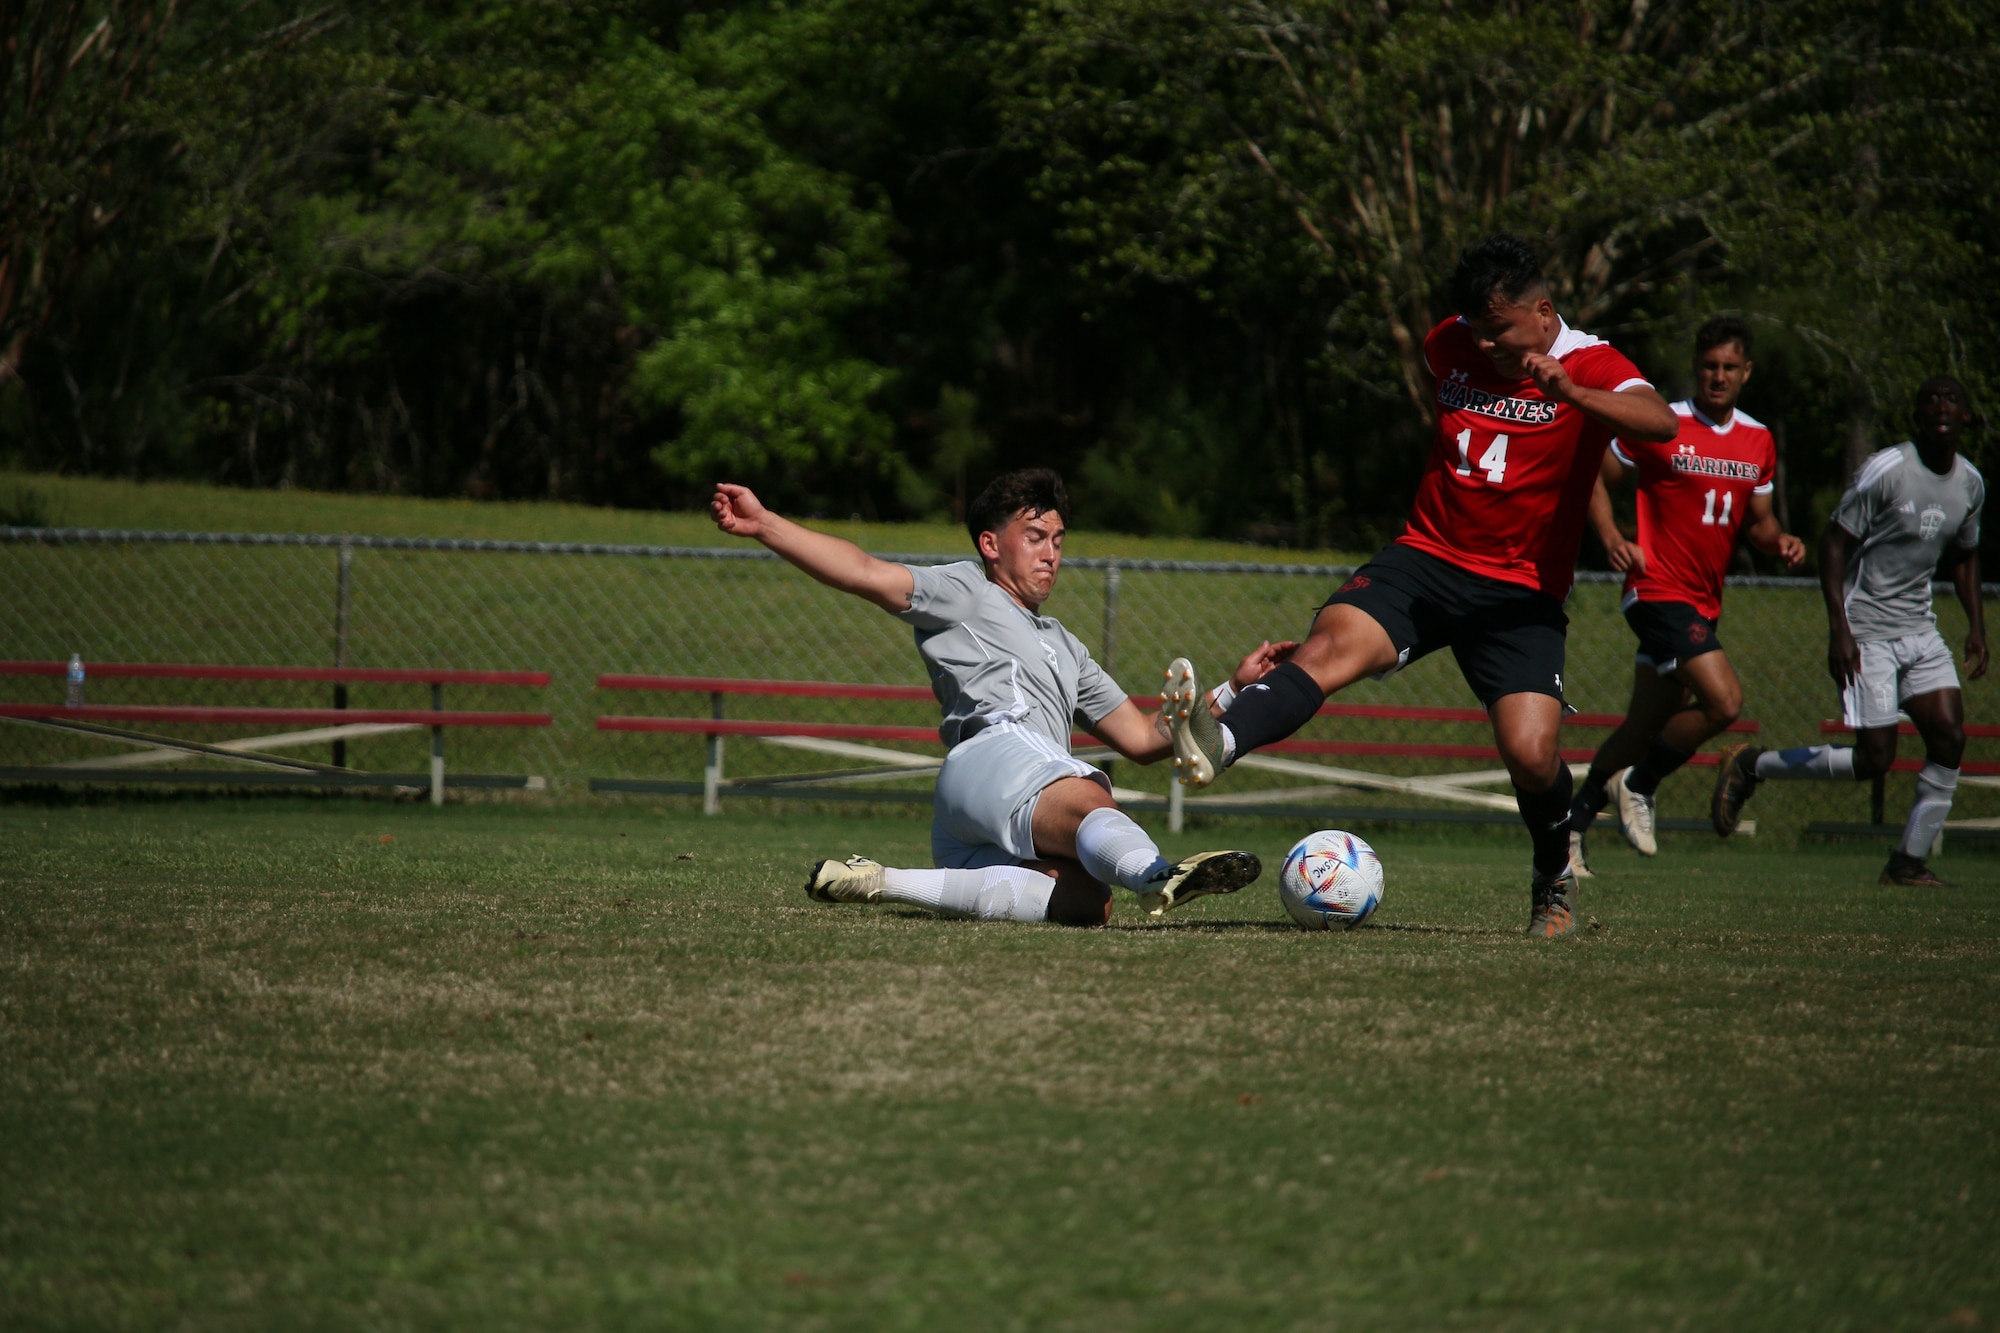 Lt. Keenan Sweeney dives to save a soccer ball while a member of the opposite team tries to kick the ball at the 2024 Armed Forces Men's Soccer Championship.